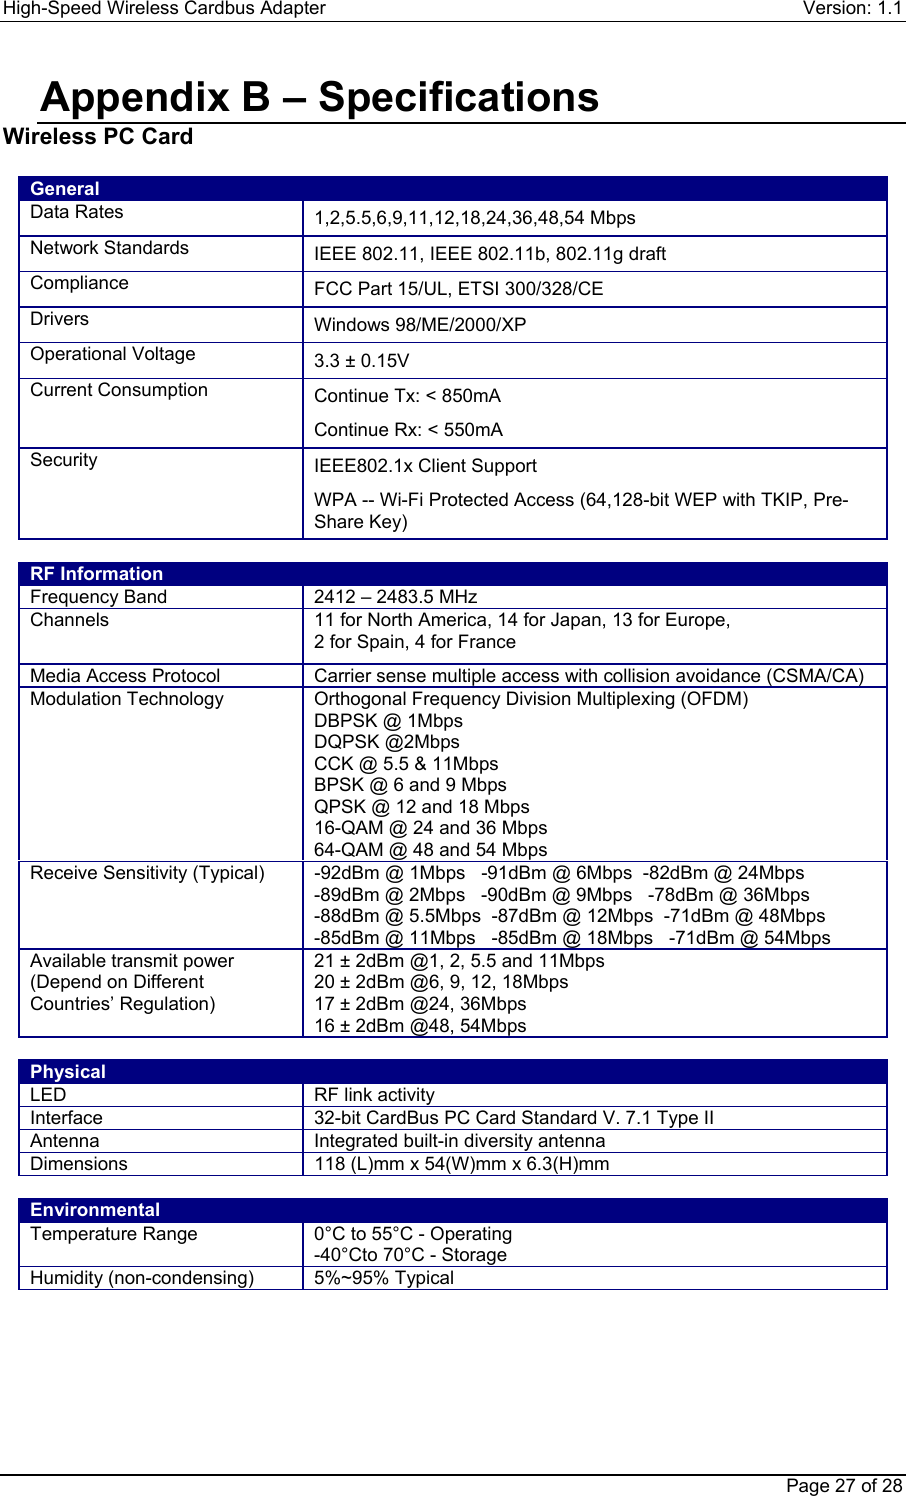 High-Speed Wireless Cardbus Adapter Version: 1.1Page 27 of 28Appendix B – SpecificationsWireless PC CardGeneralData Rates 1,2,5.5,6,9,11,12,18,24,36,48,54 MbpsNetwork Standards IEEE 802.11, IEEE 802.11b, 802.11g draftCompliance FCC Part 15/UL, ETSI 300/328/CEDrivers Windows 98/ME/2000/XPOperational Voltage 3.3 ± 0.15VCurrent Consumption Continue Tx: &lt; 850mAContinue Rx: &lt; 550mASecurity IEEE802.1x Client SupportWPA -- Wi-Fi Protected Access (64,128-bit WEP with TKIP, Pre-Share Key)RF InformationFrequency Band 2412 – 2483.5 MHzChannels 11 for North America, 14 for Japan, 13 for Europe,2 for Spain, 4 for FranceMedia Access Protocol Carrier sense multiple access with collision avoidance (CSMA/CA)Modulation Technology Orthogonal Frequency Division Multiplexing (OFDM)DBPSK @ 1MbpsDQPSK @2MbpsCCK @ 5.5 &amp; 11MbpsBPSK @ 6 and 9 MbpsQPSK @ 12 and 18 Mbps16-QAM @ 24 and 36 Mbps64-QAM @ 48 and 54 MbpsReceive Sensitivity (Typical) -92dBm @ 1Mbps   -91dBm @ 6Mbps  -82dBm @ 24Mbps-89dBm @ 2Mbps   -90dBm @ 9Mbps   -78dBm @ 36Mbps-88dBm @ 5.5Mbps  -87dBm @ 12Mbps  -71dBm @ 48Mbps-85dBm @ 11Mbps   -85dBm @ 18Mbps   -71dBm @ 54MbpsAvailable transmit power(Depend on DifferentCountries’ Regulation)21 ± 2dBm @1, 2, 5.5 and 11Mbps20 ± 2dBm @6, 9, 12, 18Mbps17 ± 2dBm @24, 36Mbps16 ± 2dBm @48, 54MbpsPhysicalLED RF link activityInterface 32-bit CardBus PC Card Standard V. 7.1 Type IIAntenna Integrated built-in diversity antennaDimensions 118 (L)mm x 54(W)mm x 6.3(H)mmEnvironmentalTemperature Range 0°C to 55°C - Operating-40°Cto 70°C - StorageHumidity (non-condensing) 5%~95% Typical